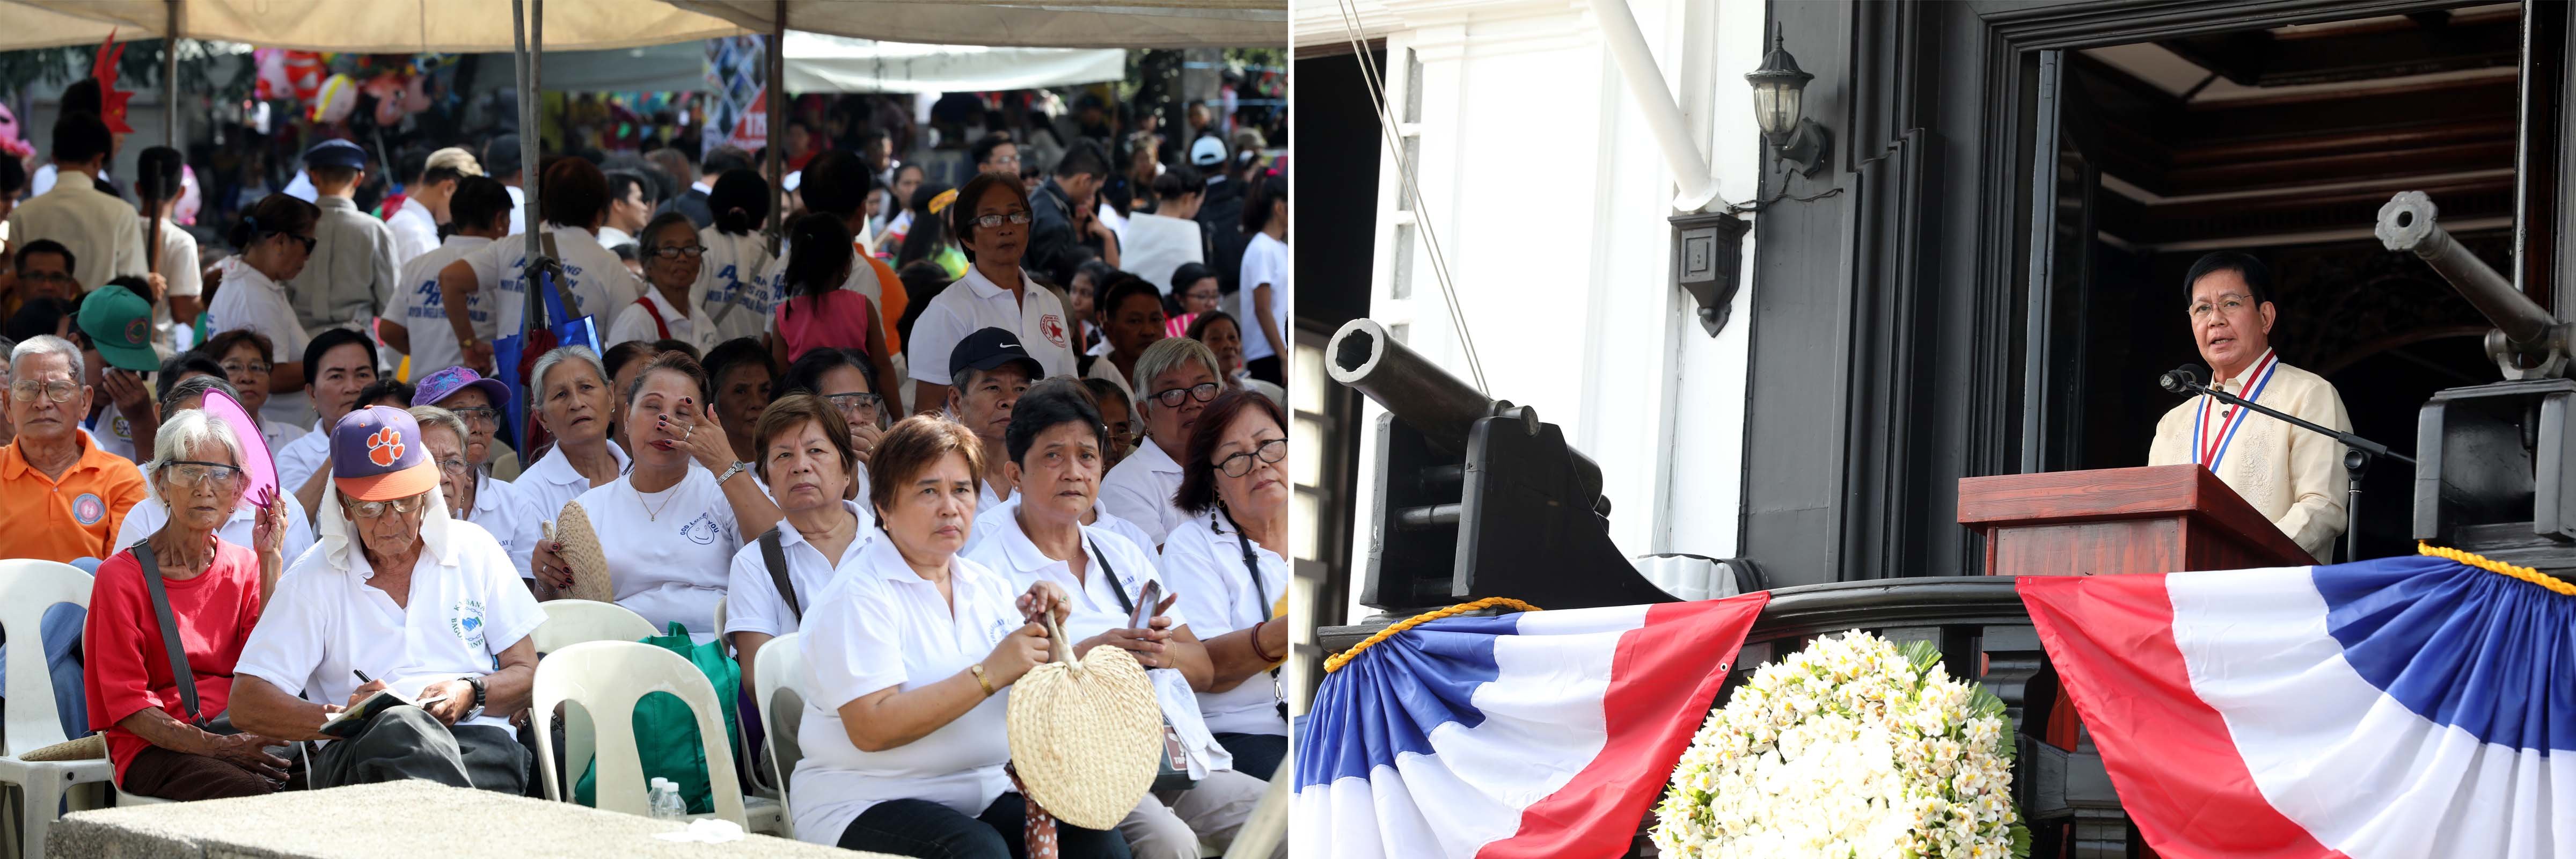 Lacson urges Filipinos to show patriotism beyond Independence Day